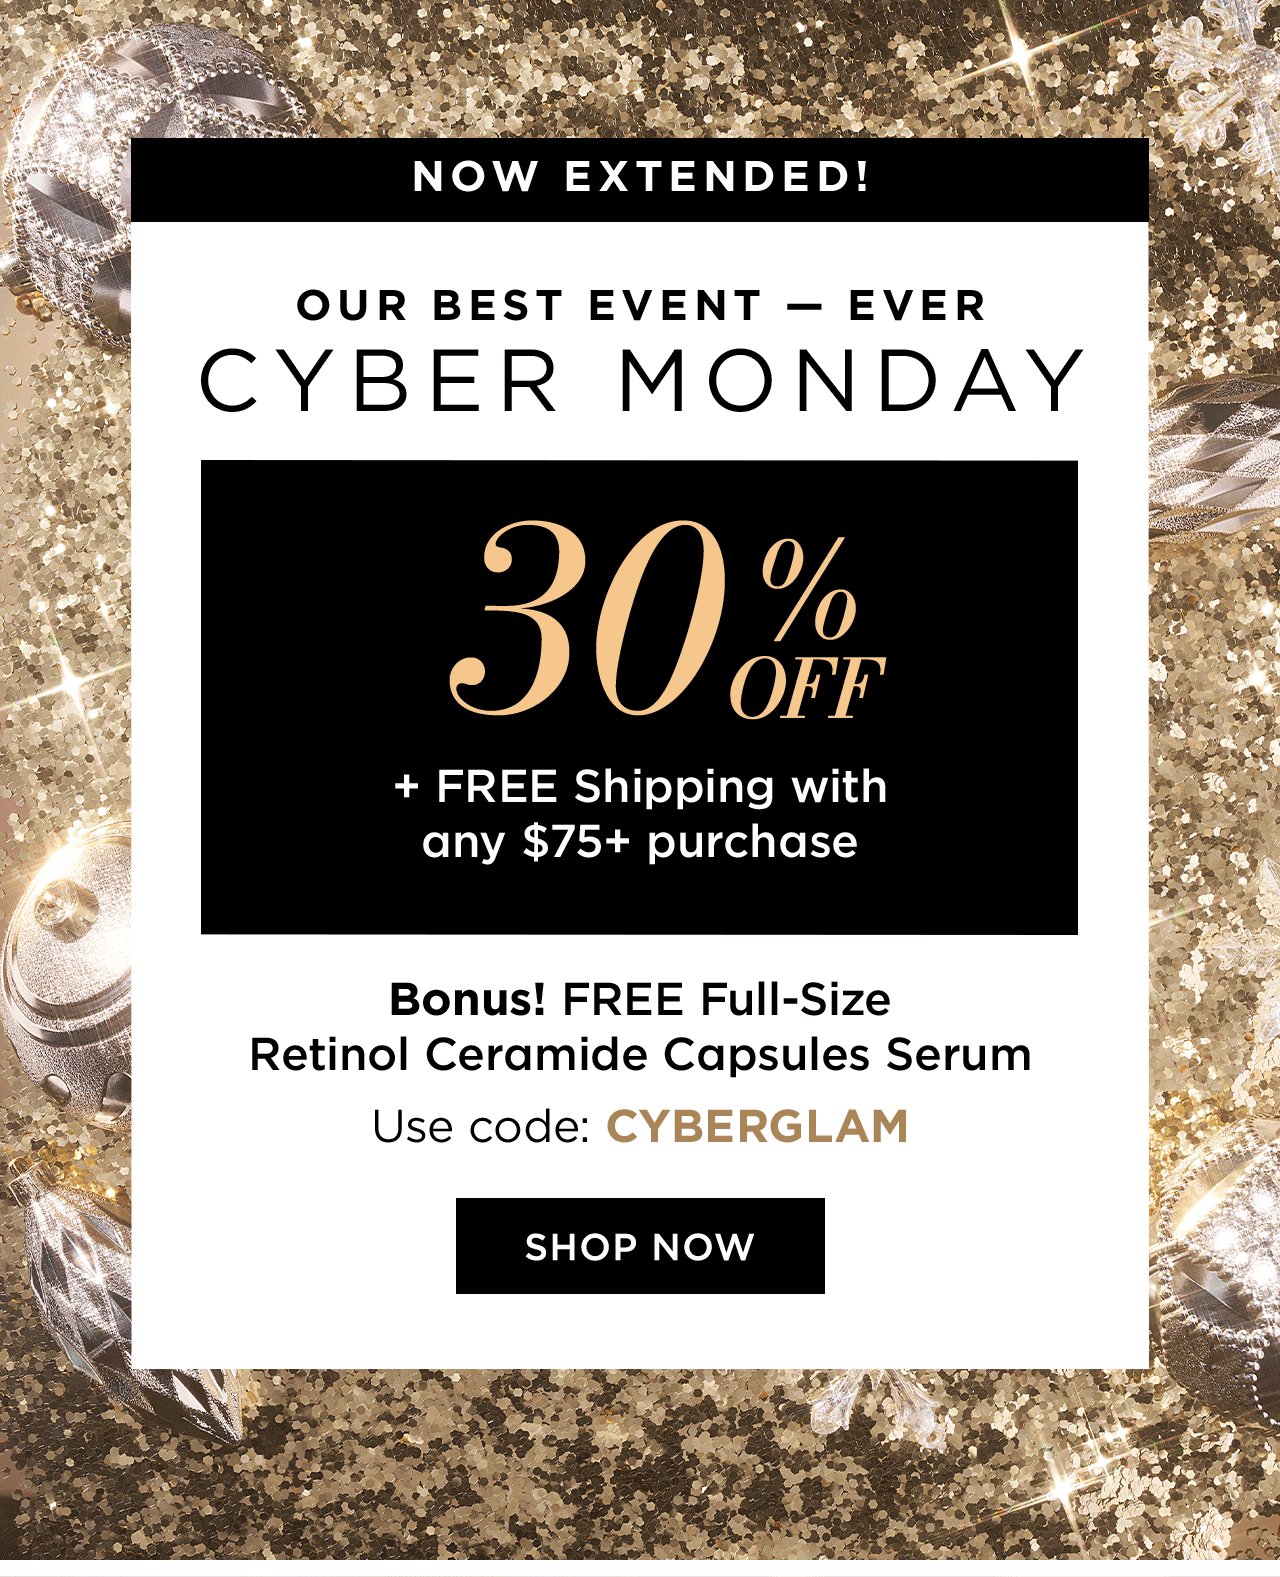 NOW EXTENDED!

Our Best Event Ever
CYBER MONDAY
30% OFF
+ Free Shipping with any $75+ purchase

Bonus! FREE Full-Size Retinol Ceramide Capsules Serum
Use code: CYBERGLAM
SHOP NOW (CTA)